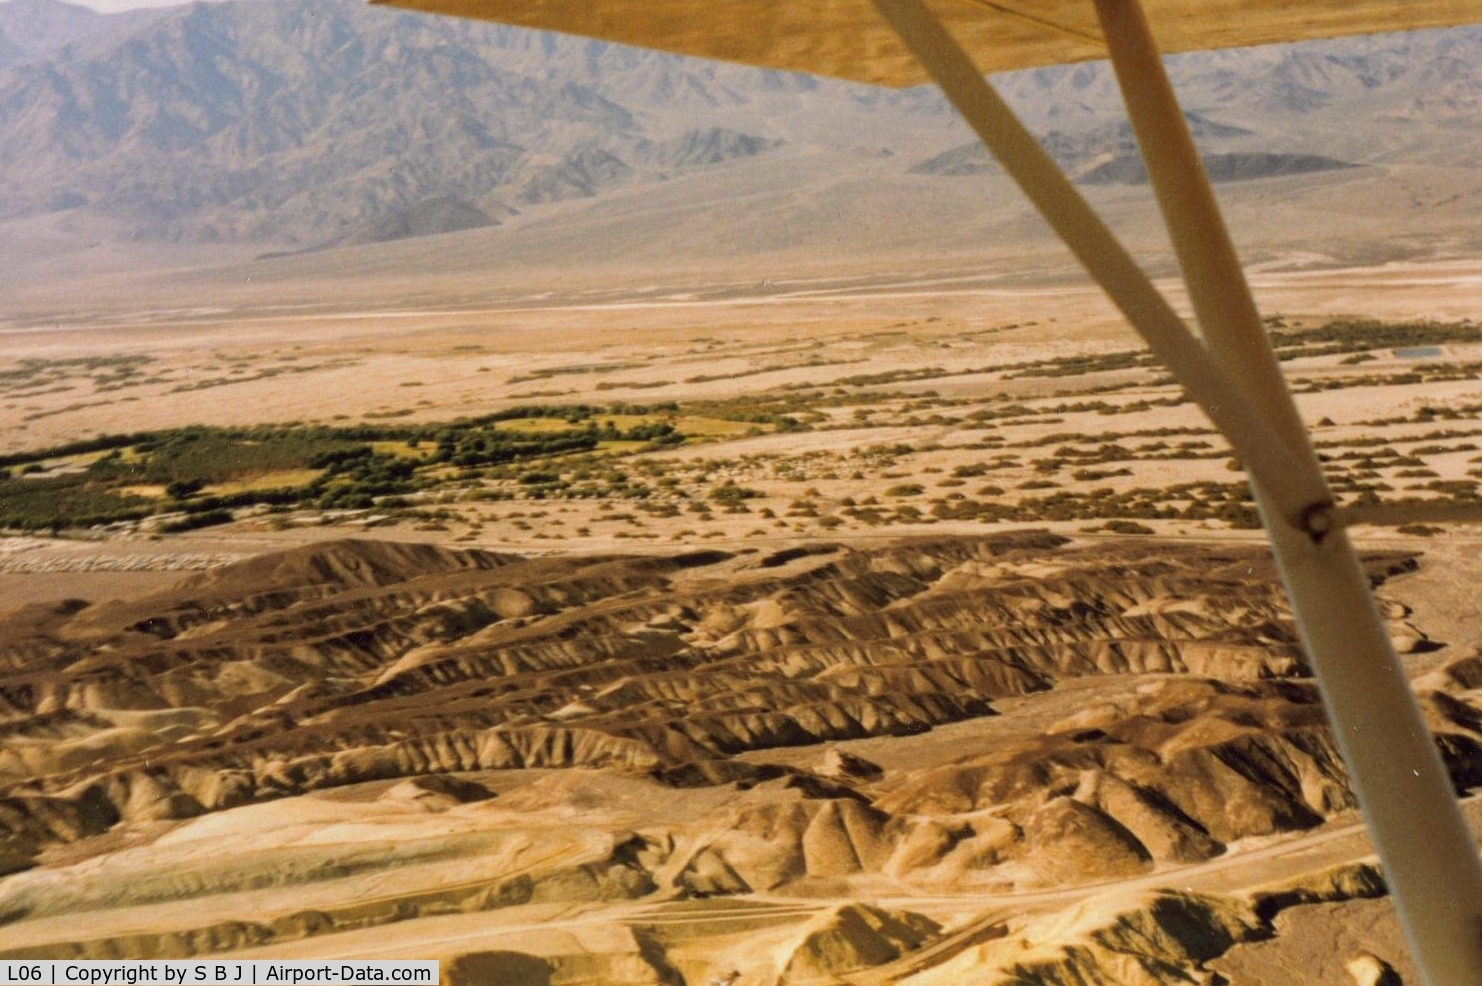 Furnace Creek Airport (L06) - Furnace Creek looking to the SW. Airport is seen at the top of the wing strut.